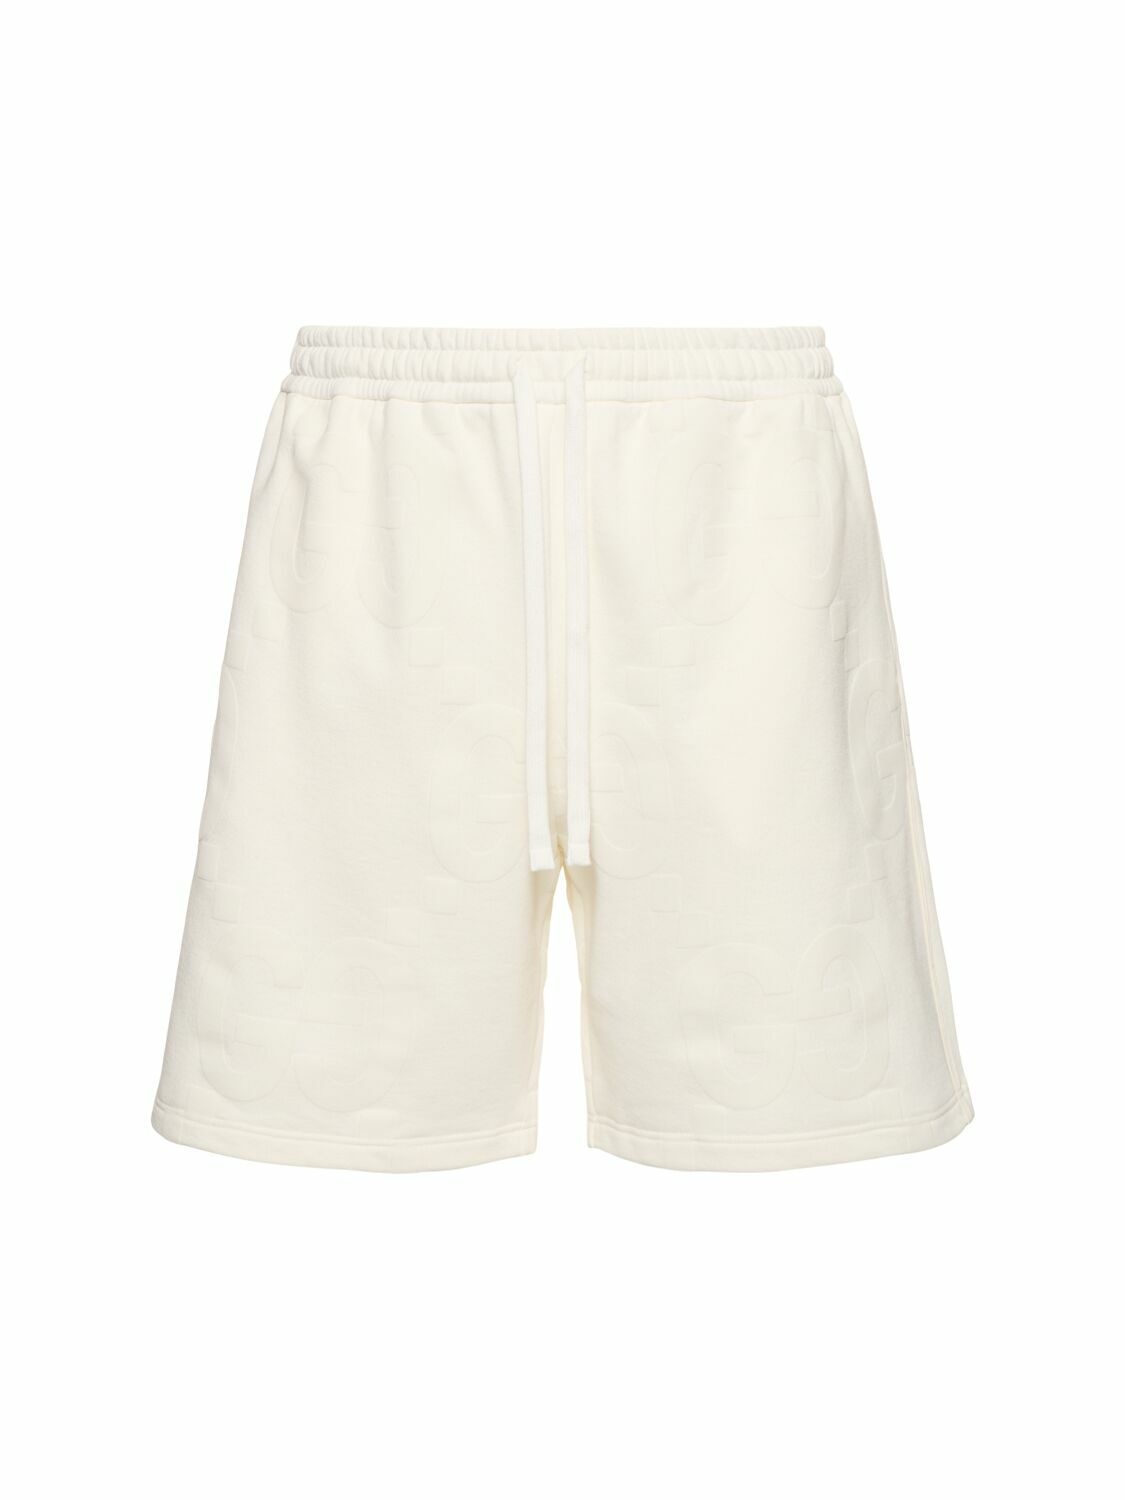 Photo: GUCCI Light Felted Cotton Jersey Shorts